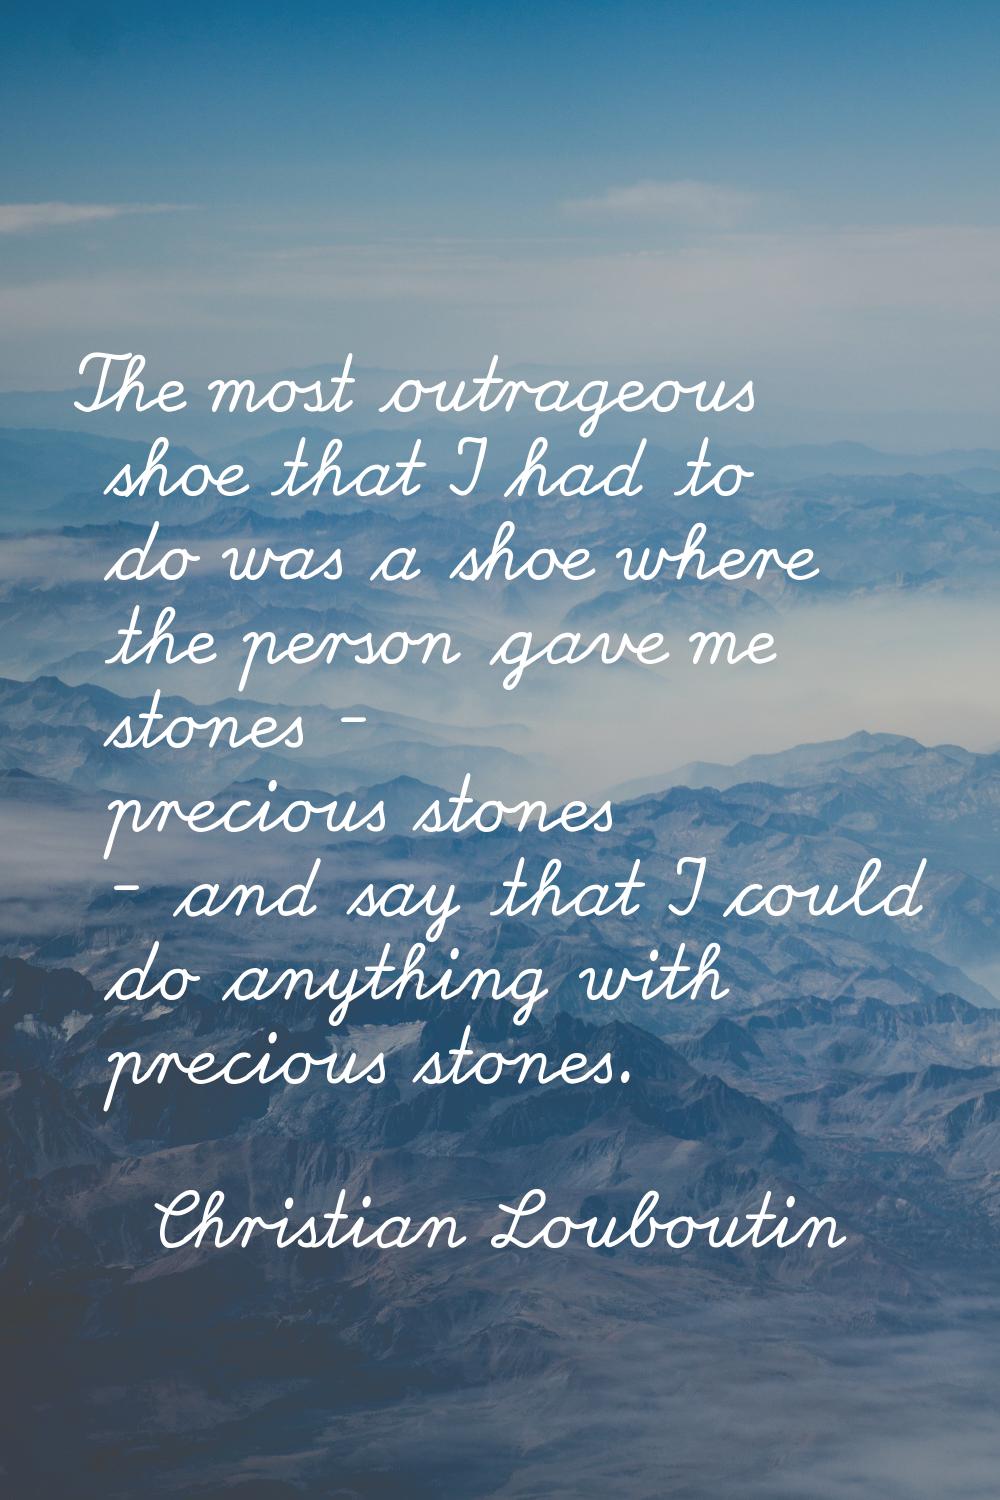 The most outrageous shoe that I had to do was a shoe where the person gave me stones - precious sto